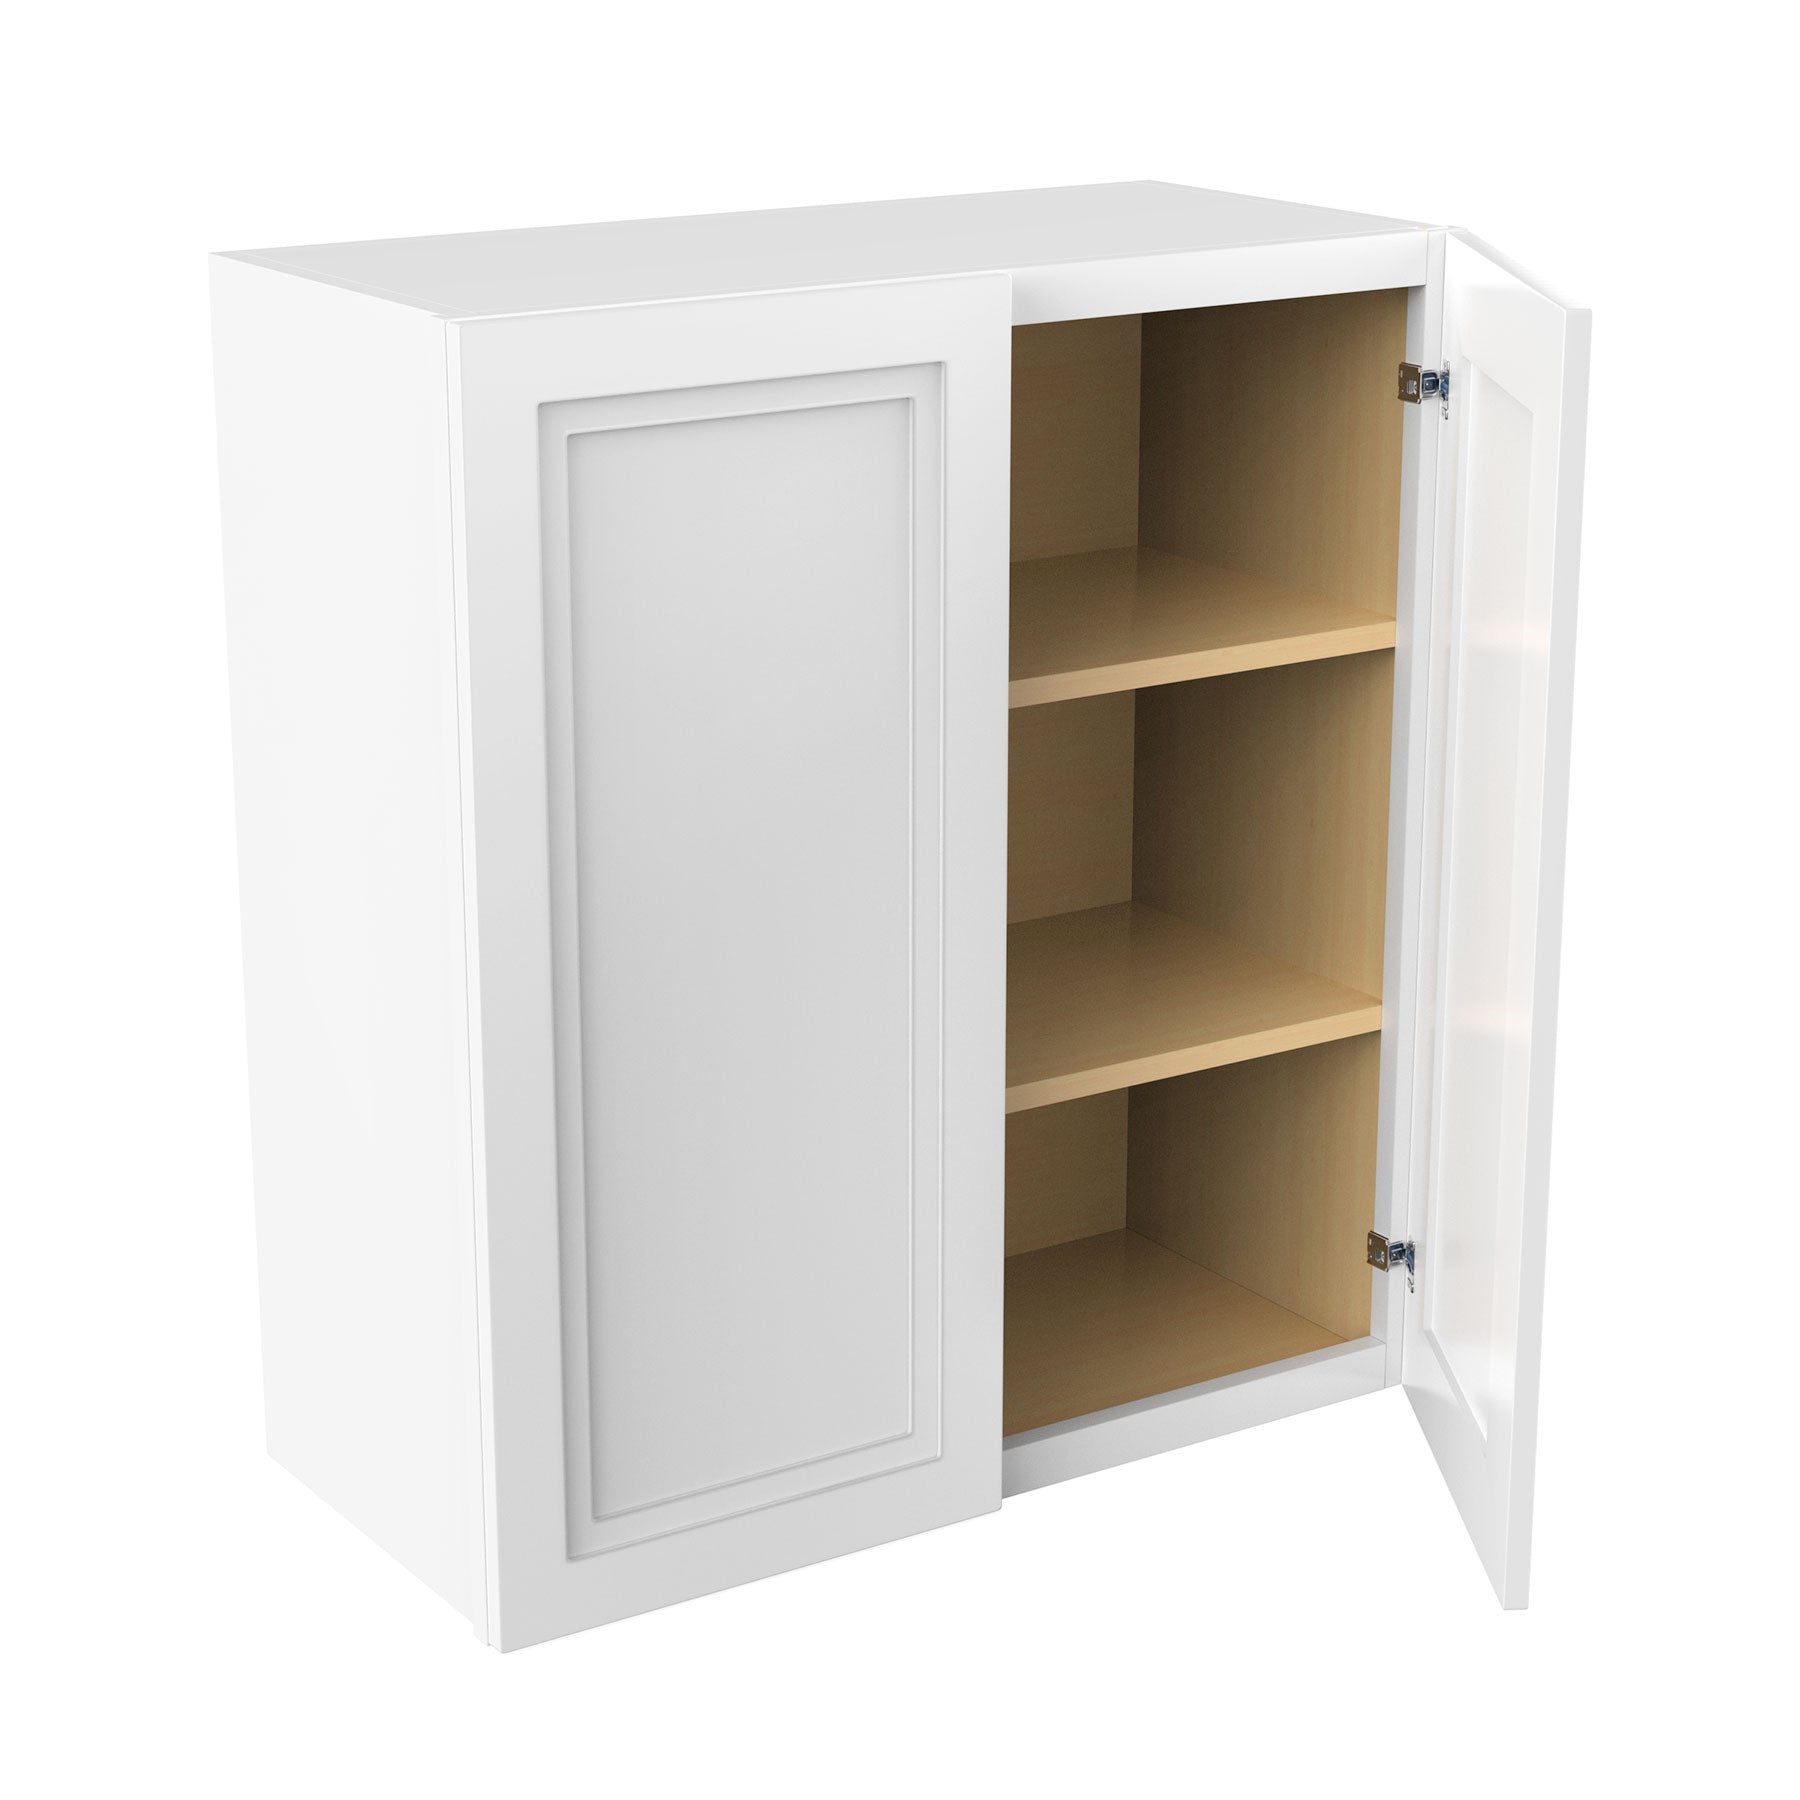 RTA - Fashion White - 30" High Double Door Wall Cabinet | 27"W x 30"H x 12"D